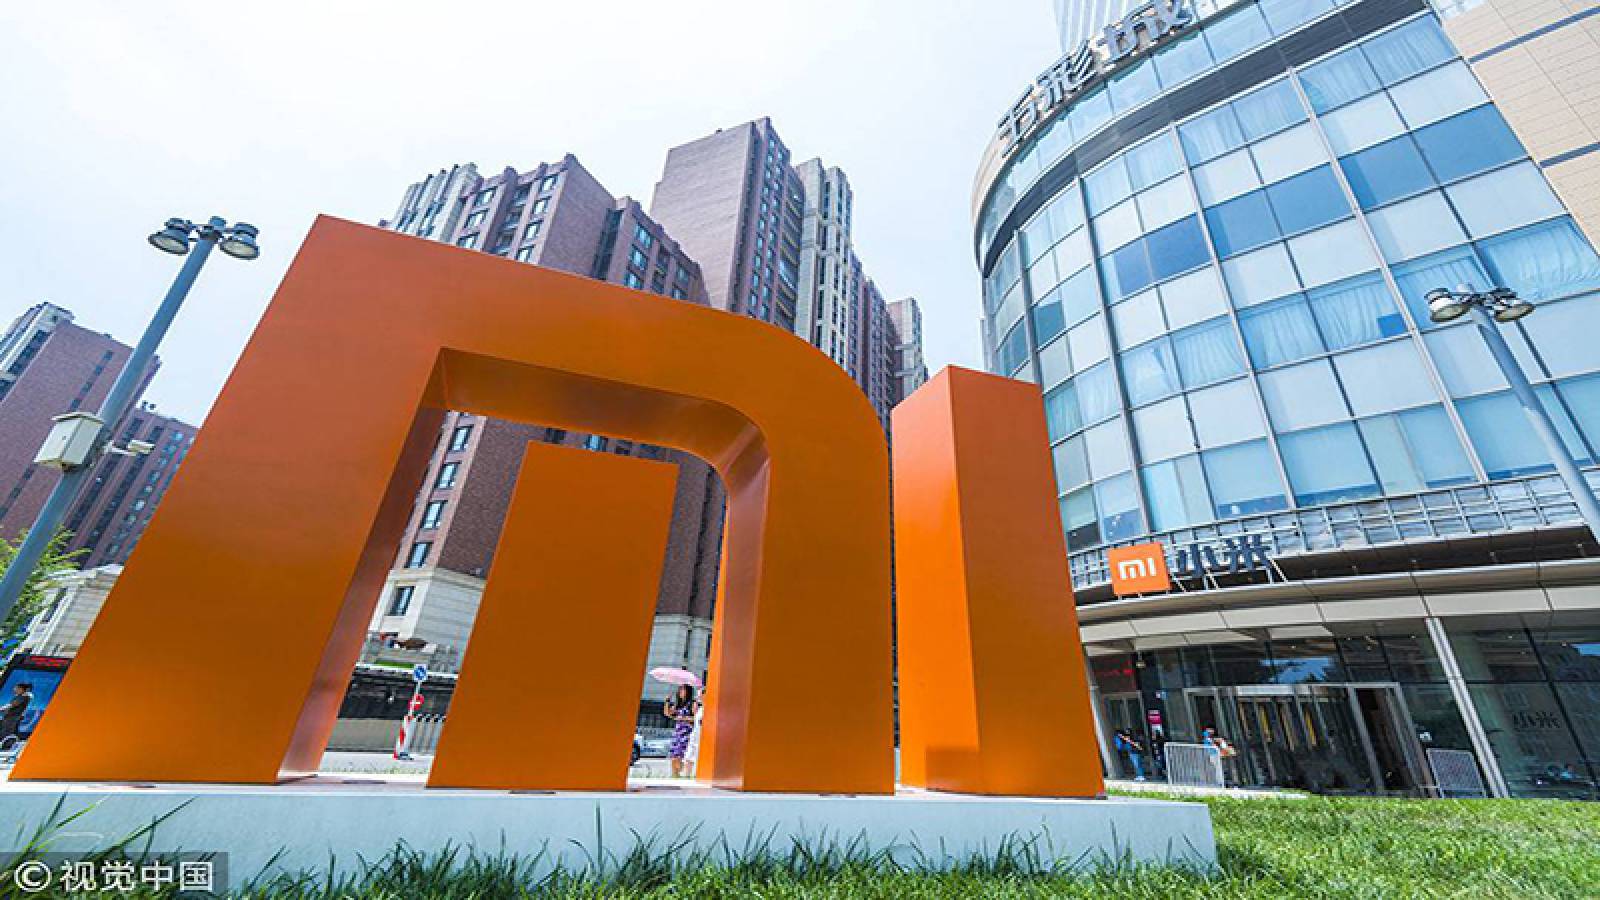 Xiaomi - silently develops the Chinese game industry